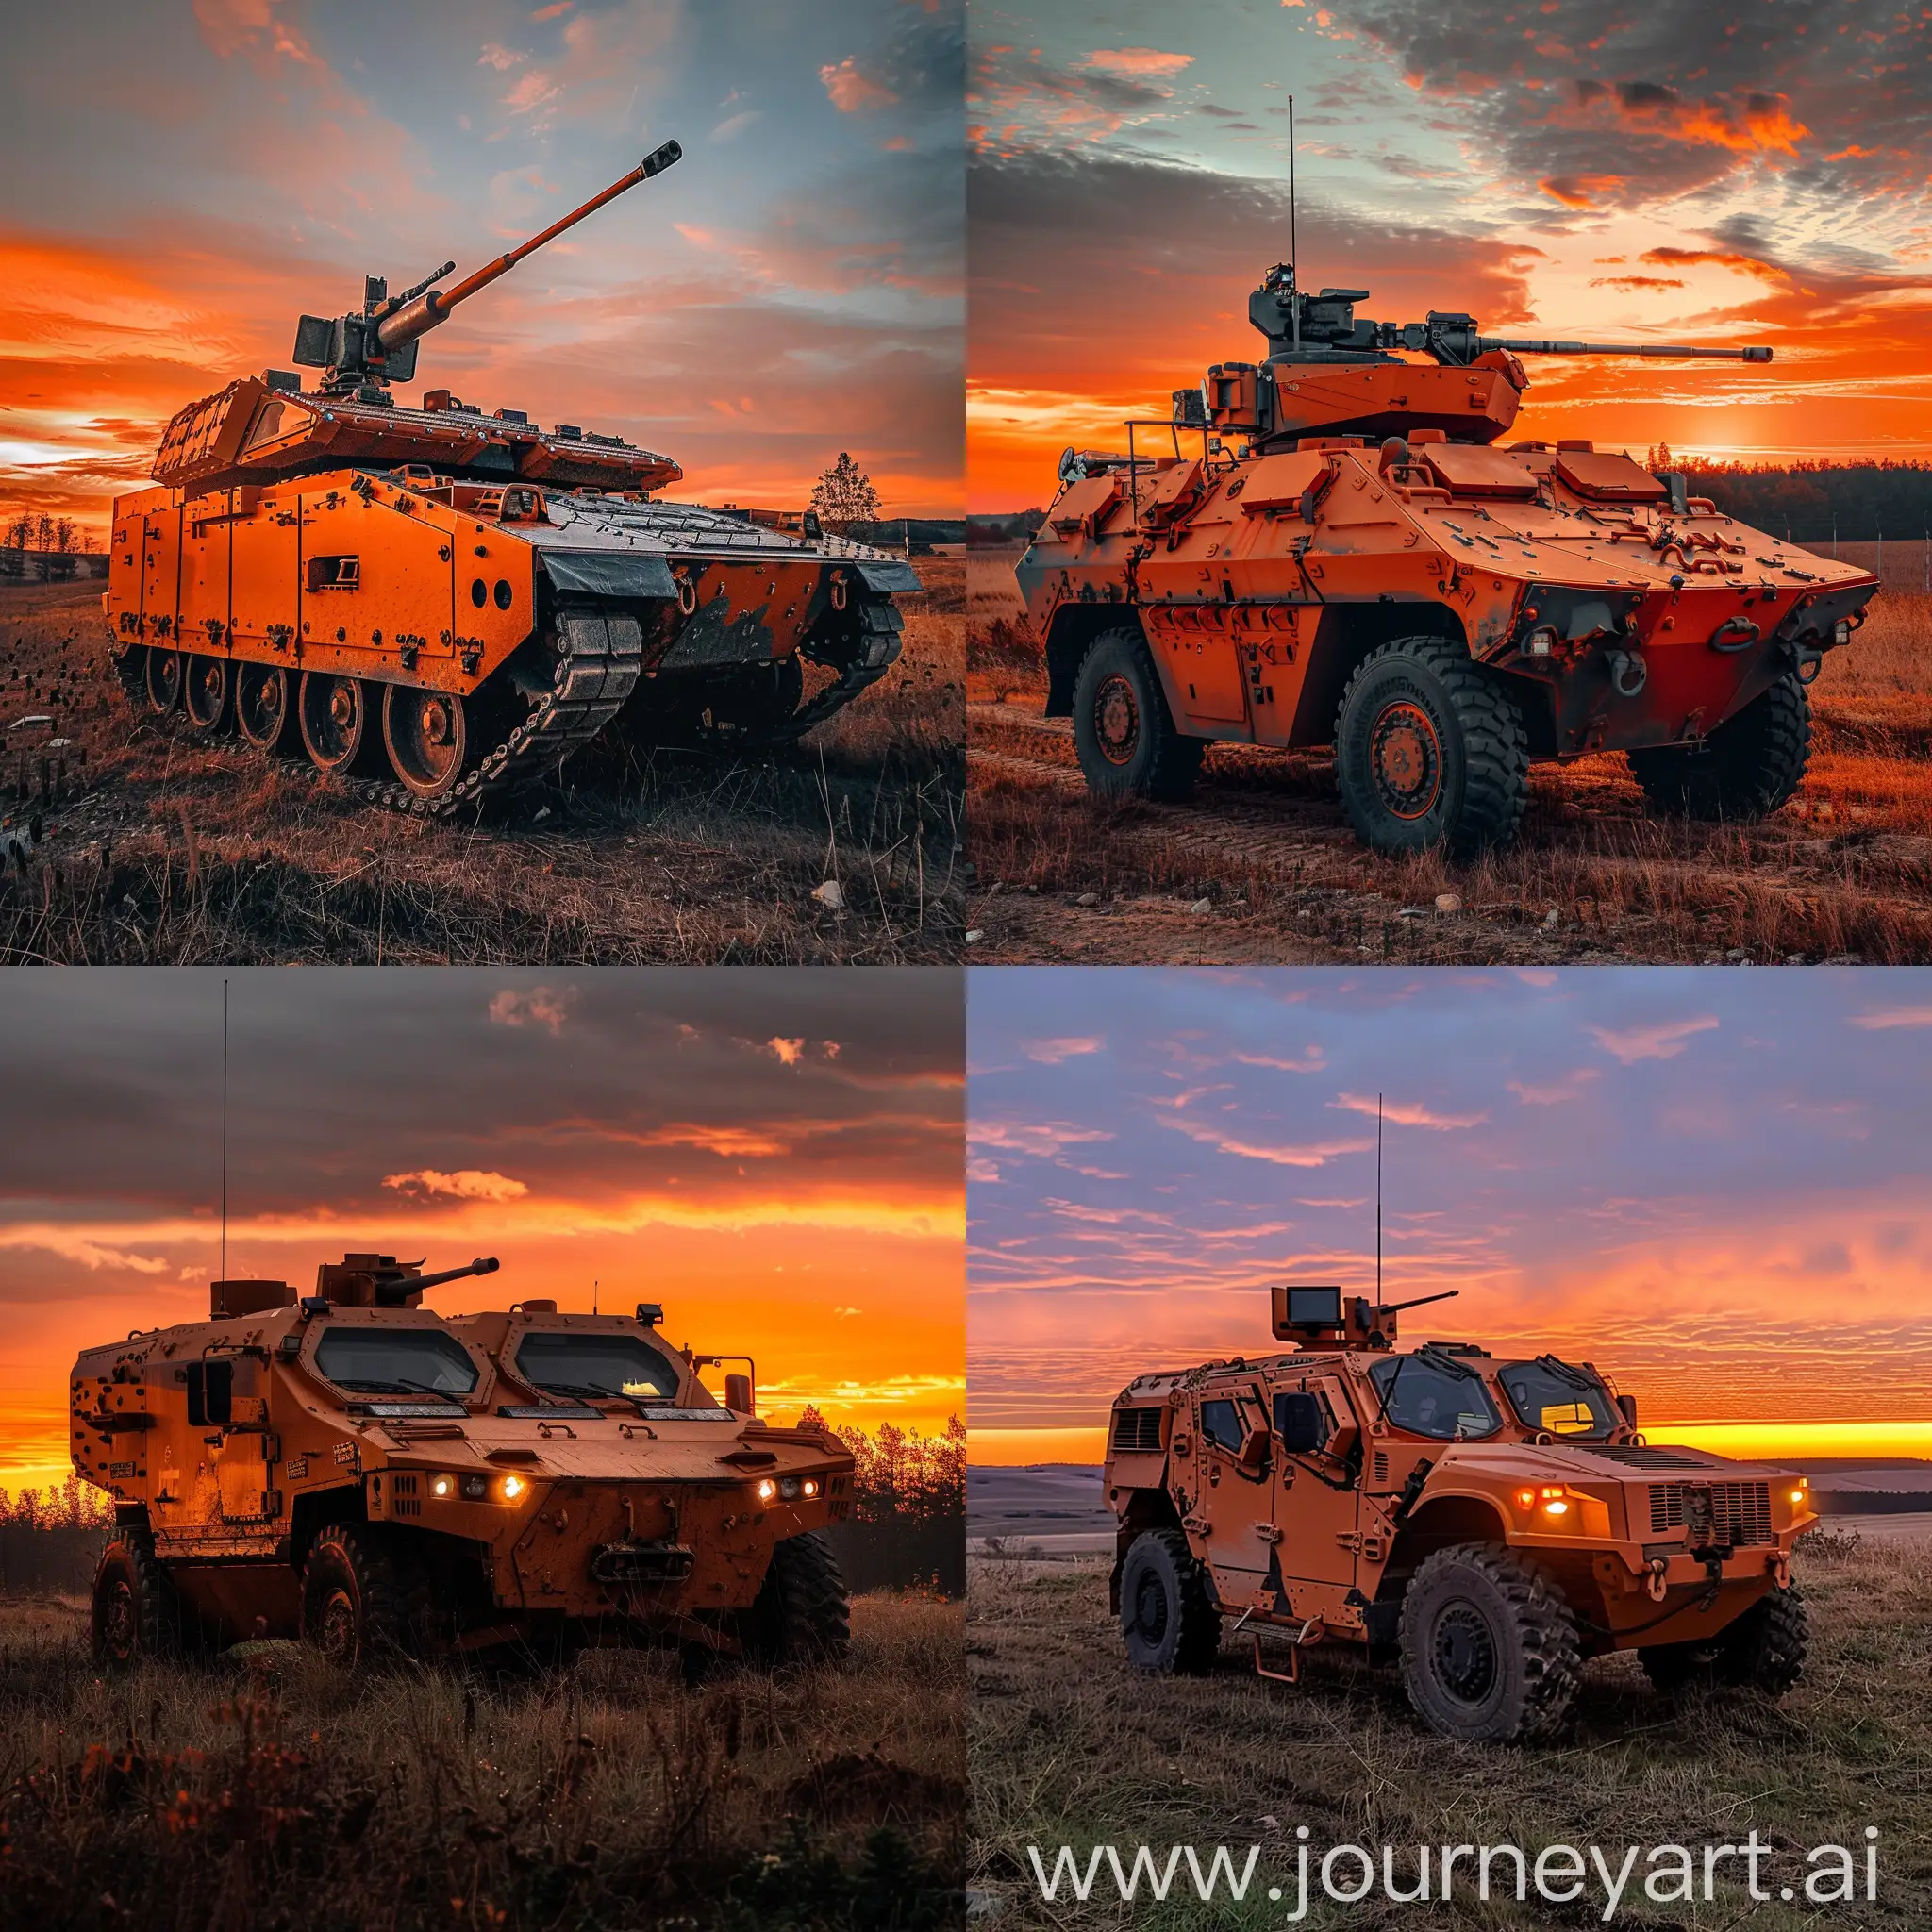 Sunset-Scene-with-Infantry-Fighting-Vehicle-2-in-Vibrant-Orange-Colors